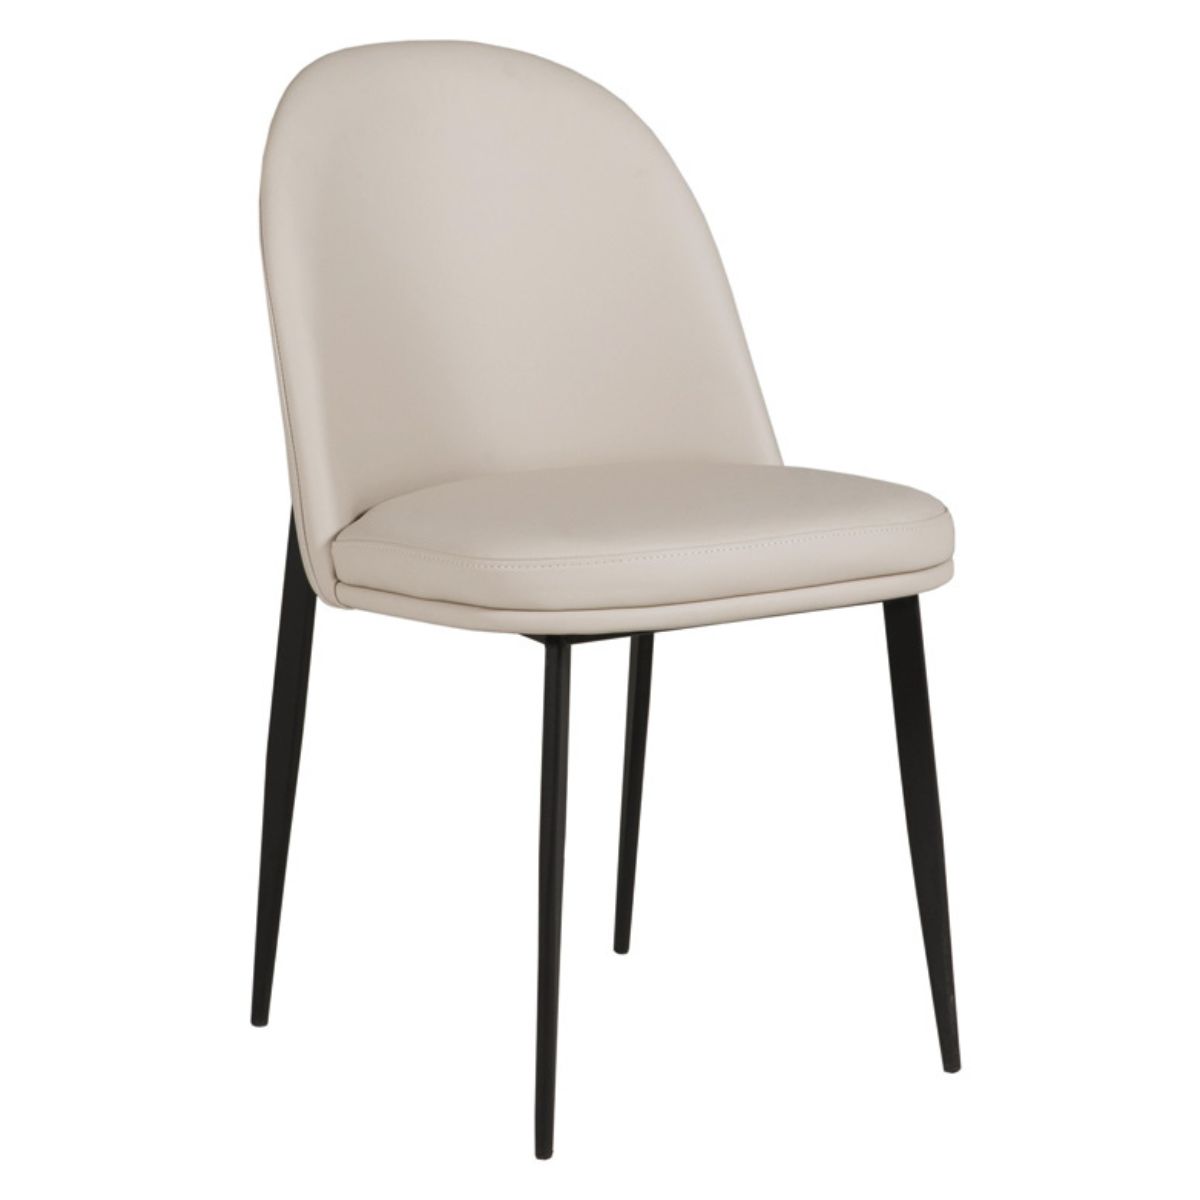 Valentia Leather Dining Chair Beige - 1